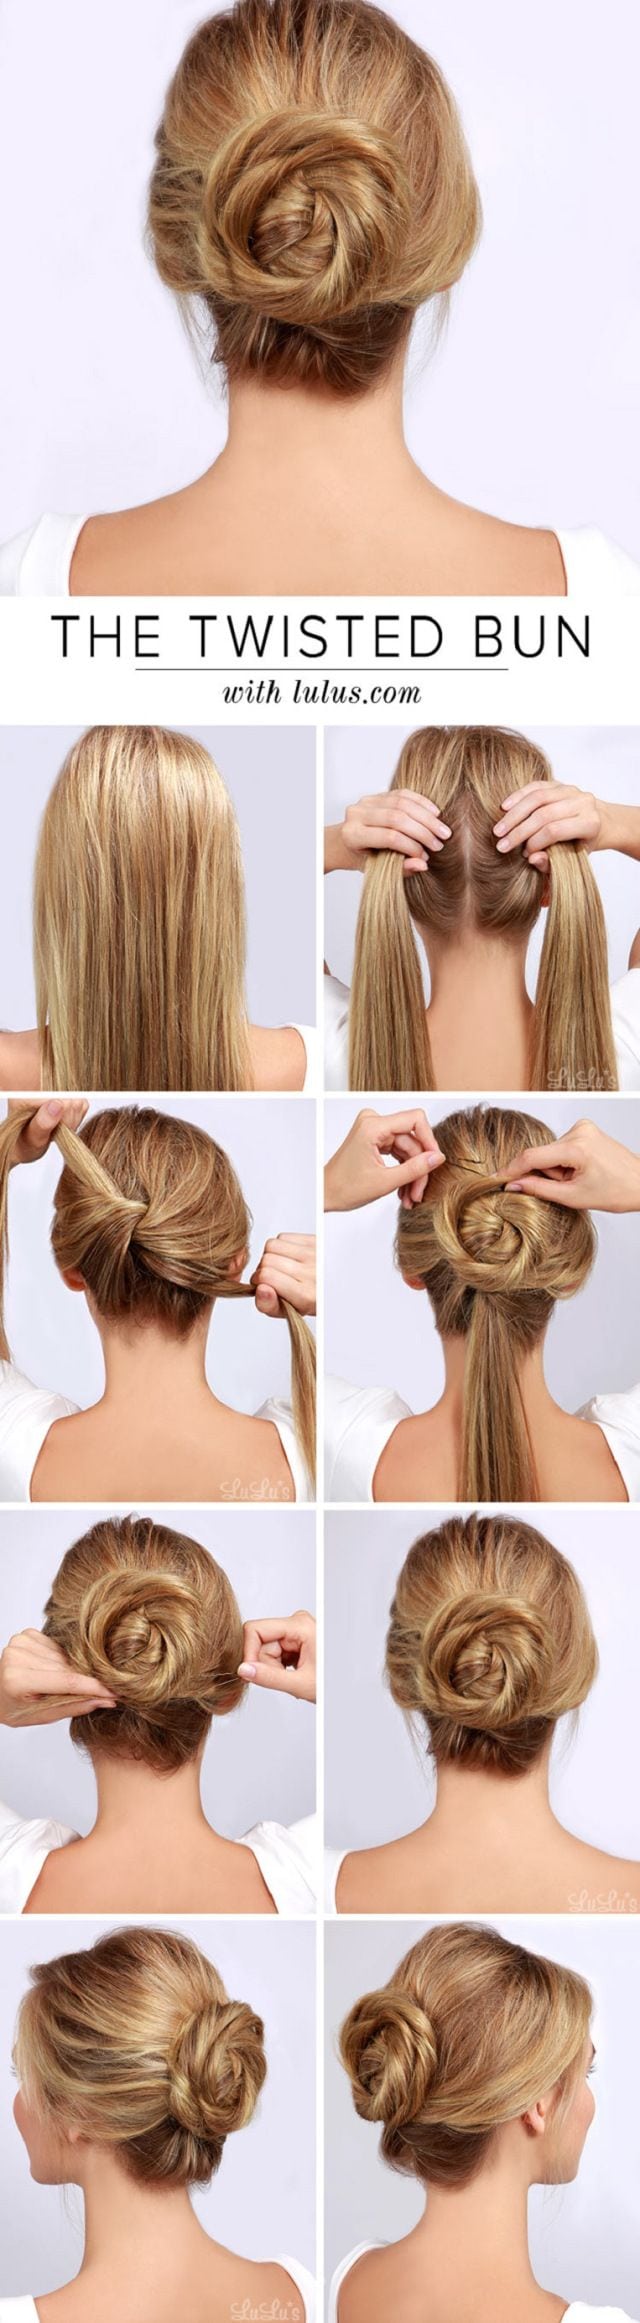 [ad_1]

Twisted Bun Hair Tutorial | 12 Best Beauty Tutorials for Fall 2014 www.jexshop.com/
Source by margrietje01
[ad_2]
			
			…